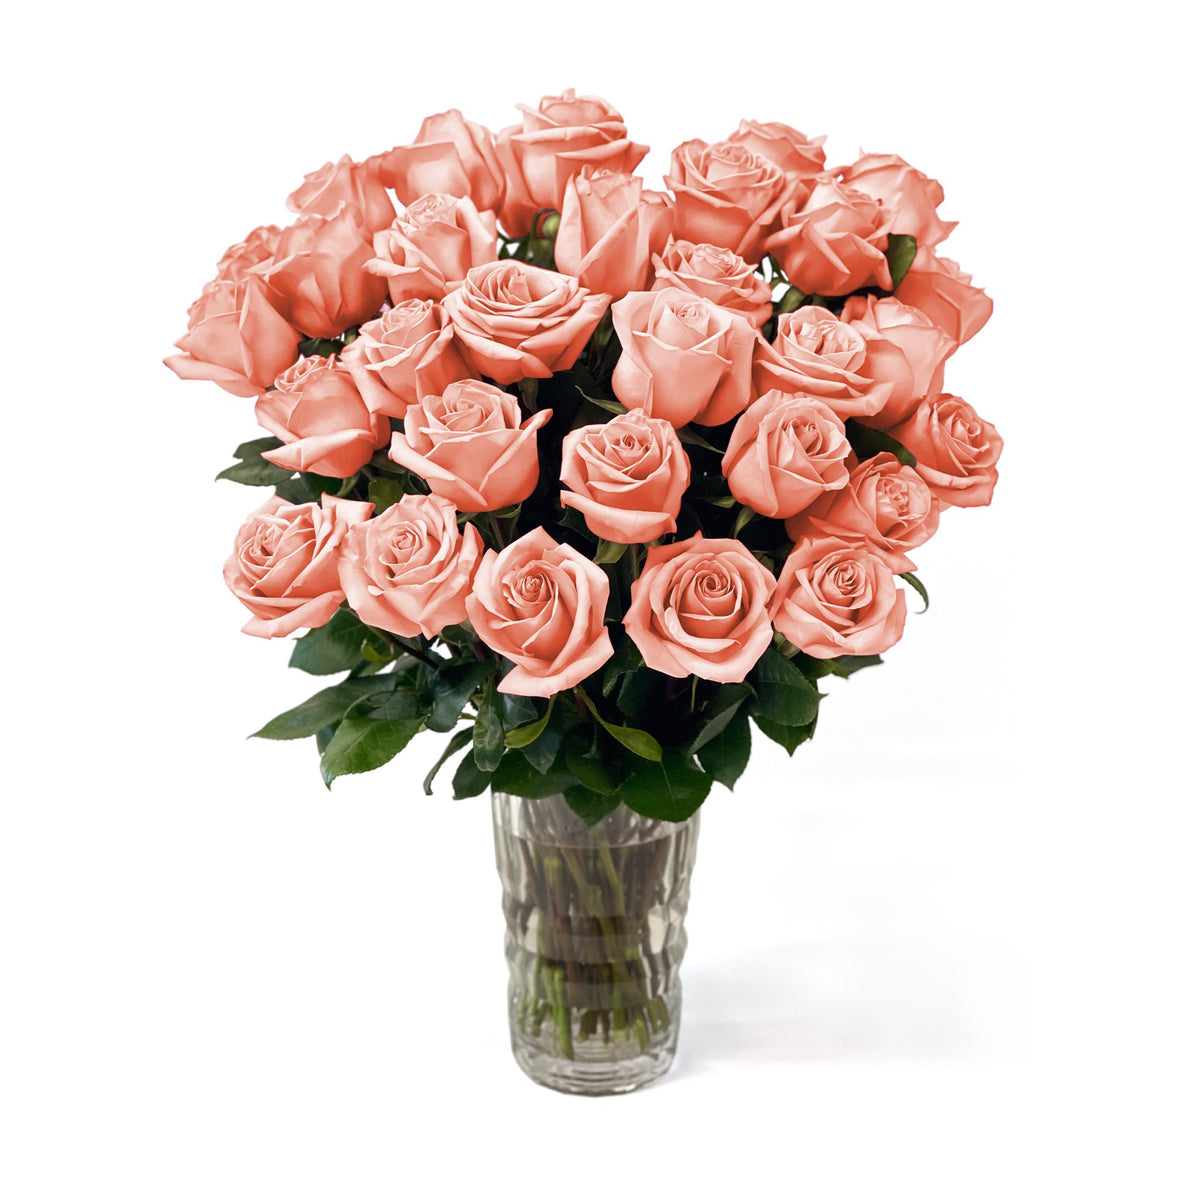 NYC Flower Delivery - Fresh Roses in a Crystal Vase | Peach - Roses